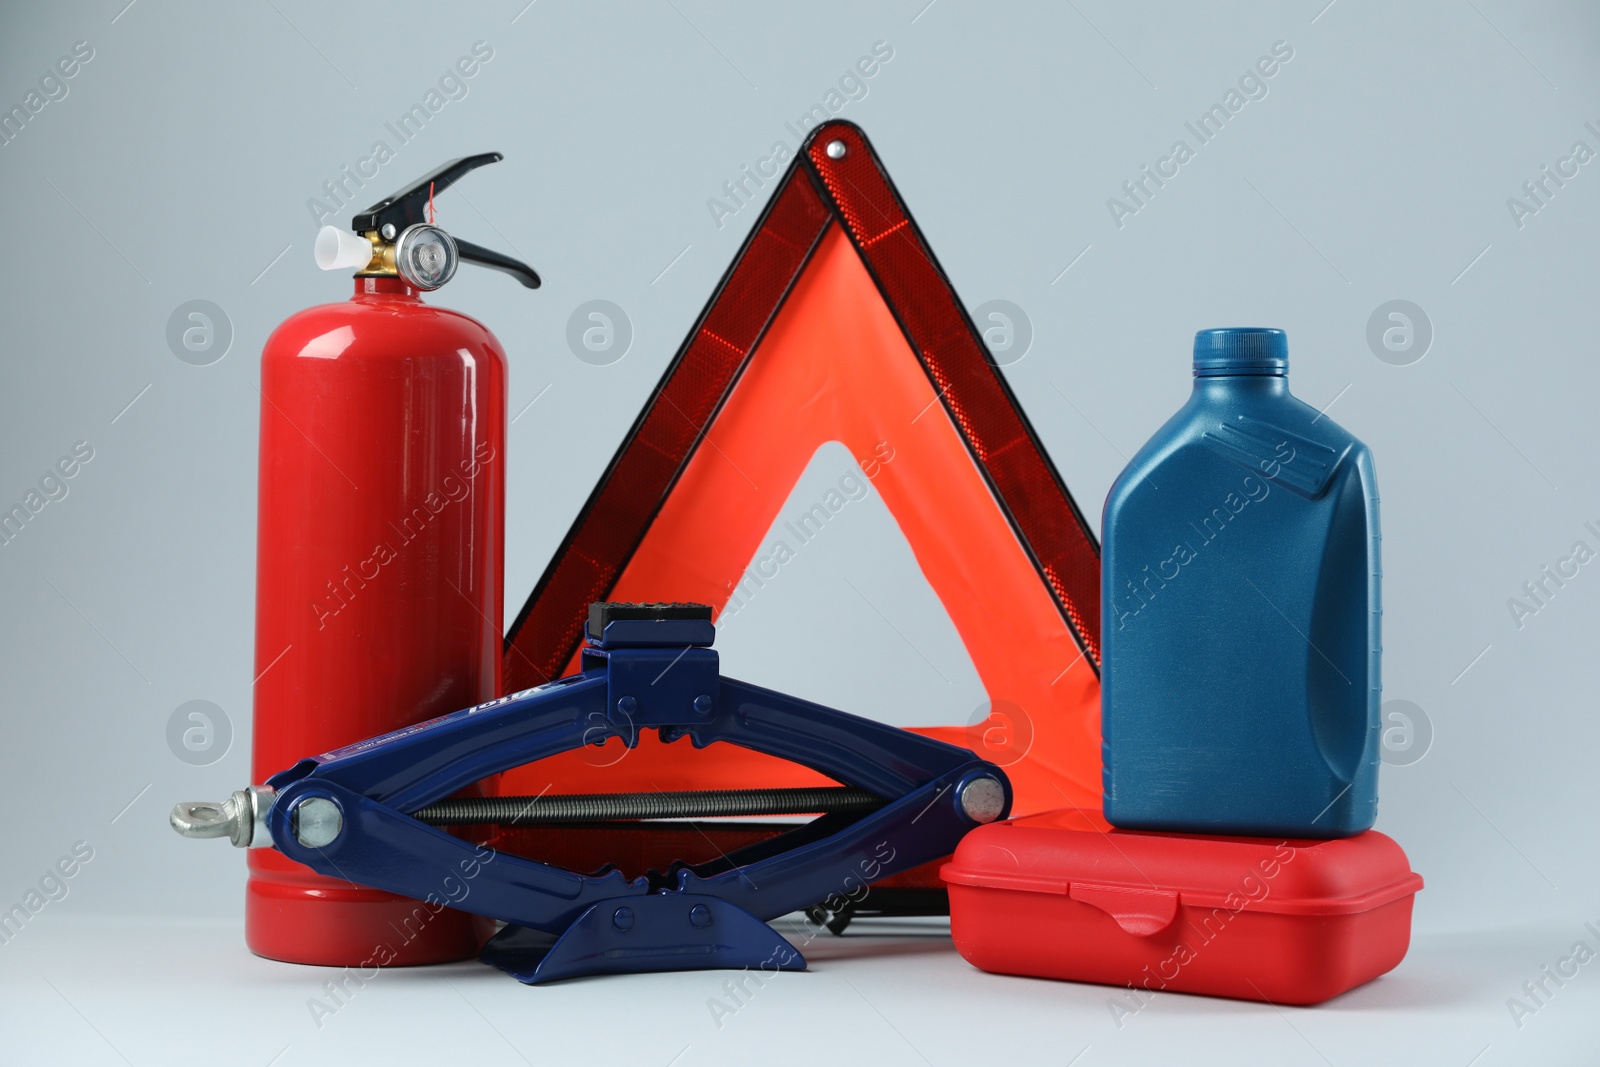 Photo of Set of car safety equipment on light grey background